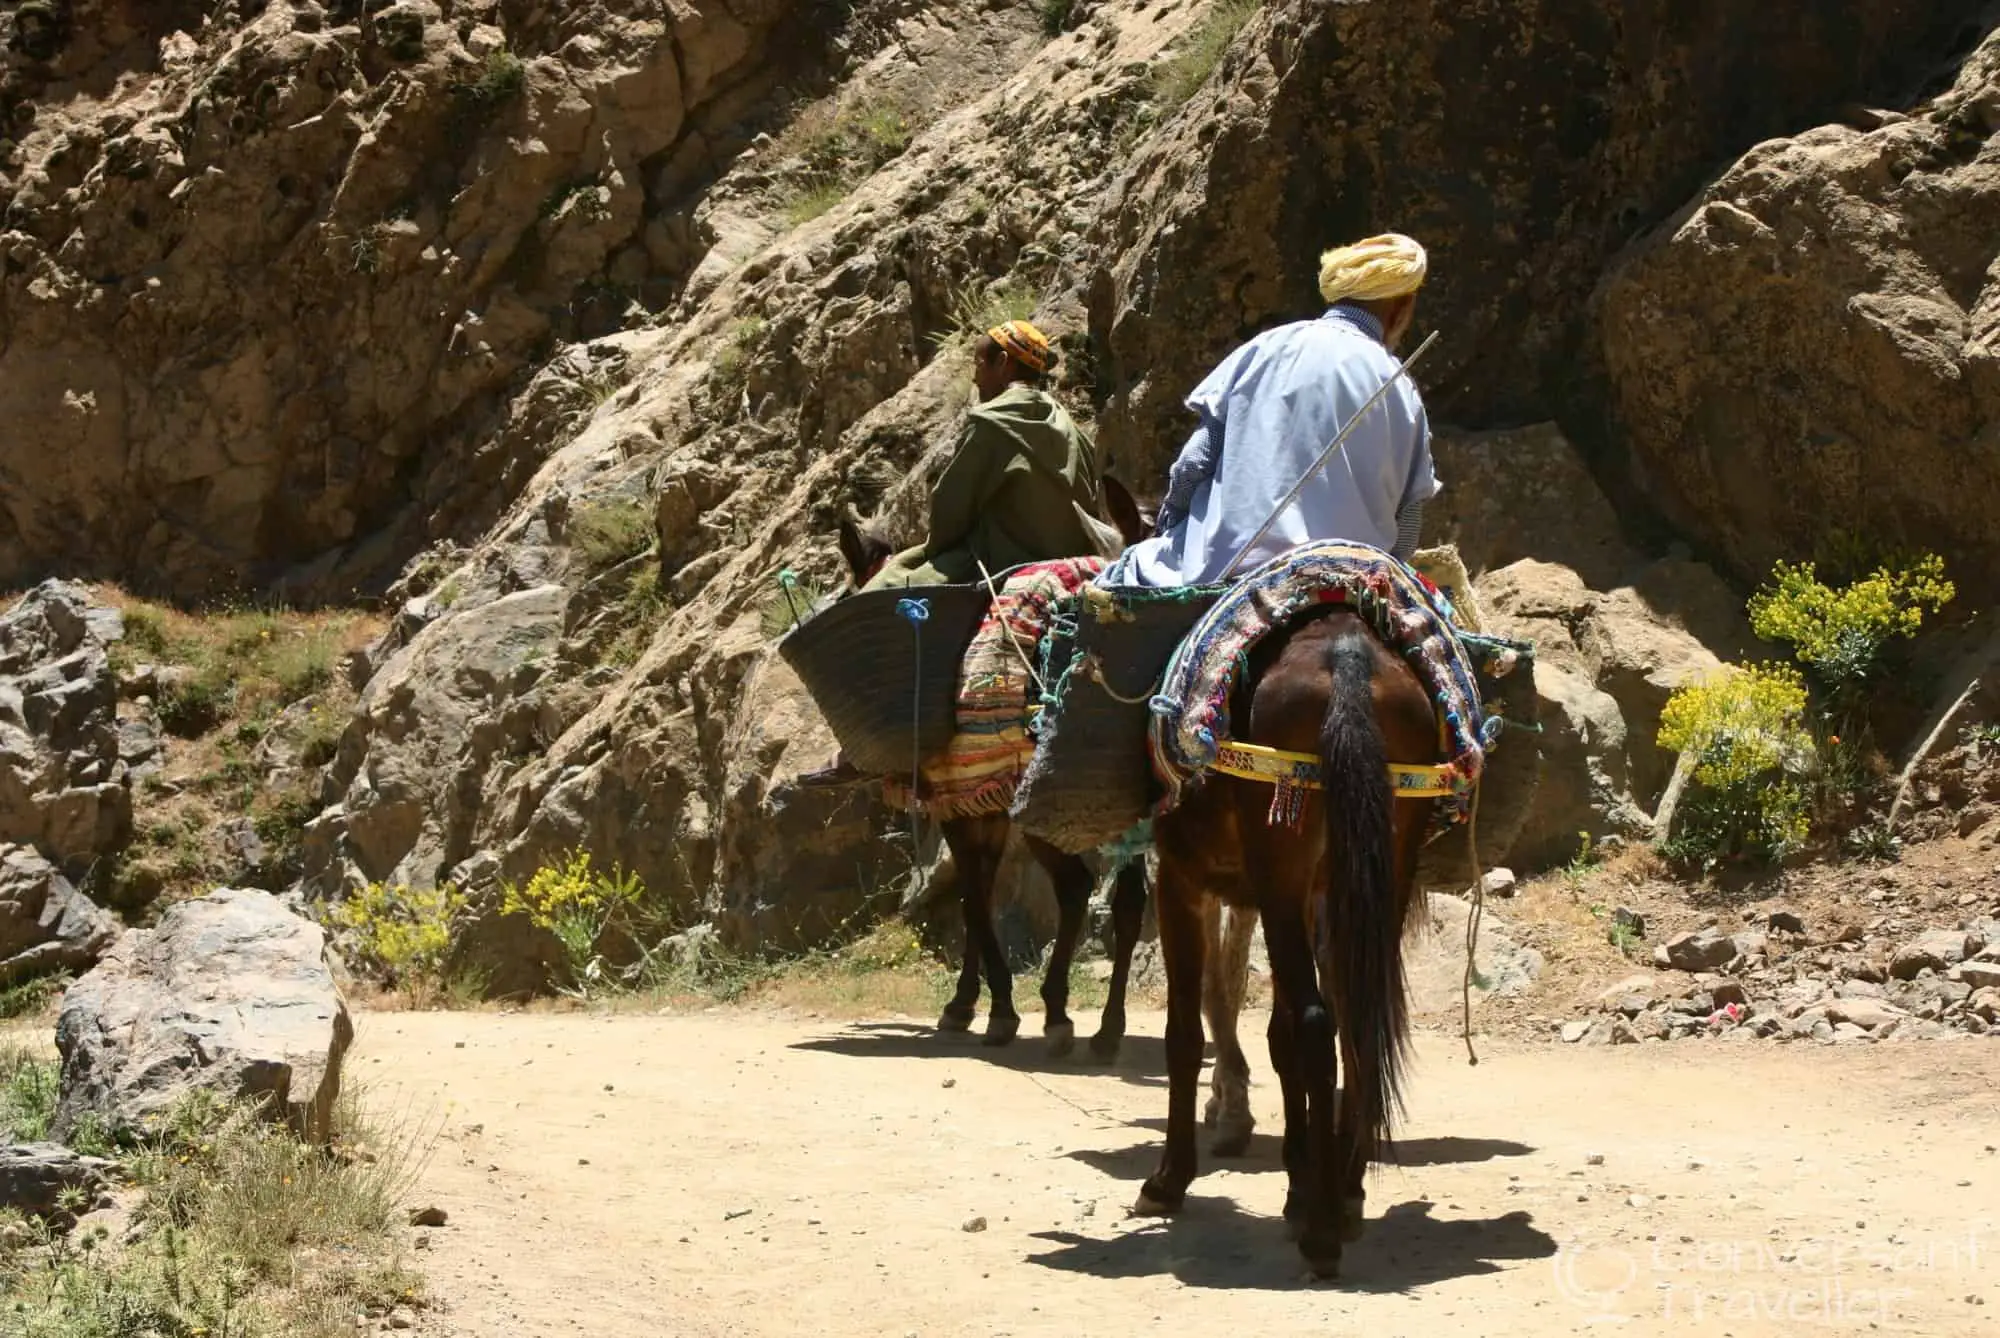 Local transport en-route to Armed near Imlil, Morocco